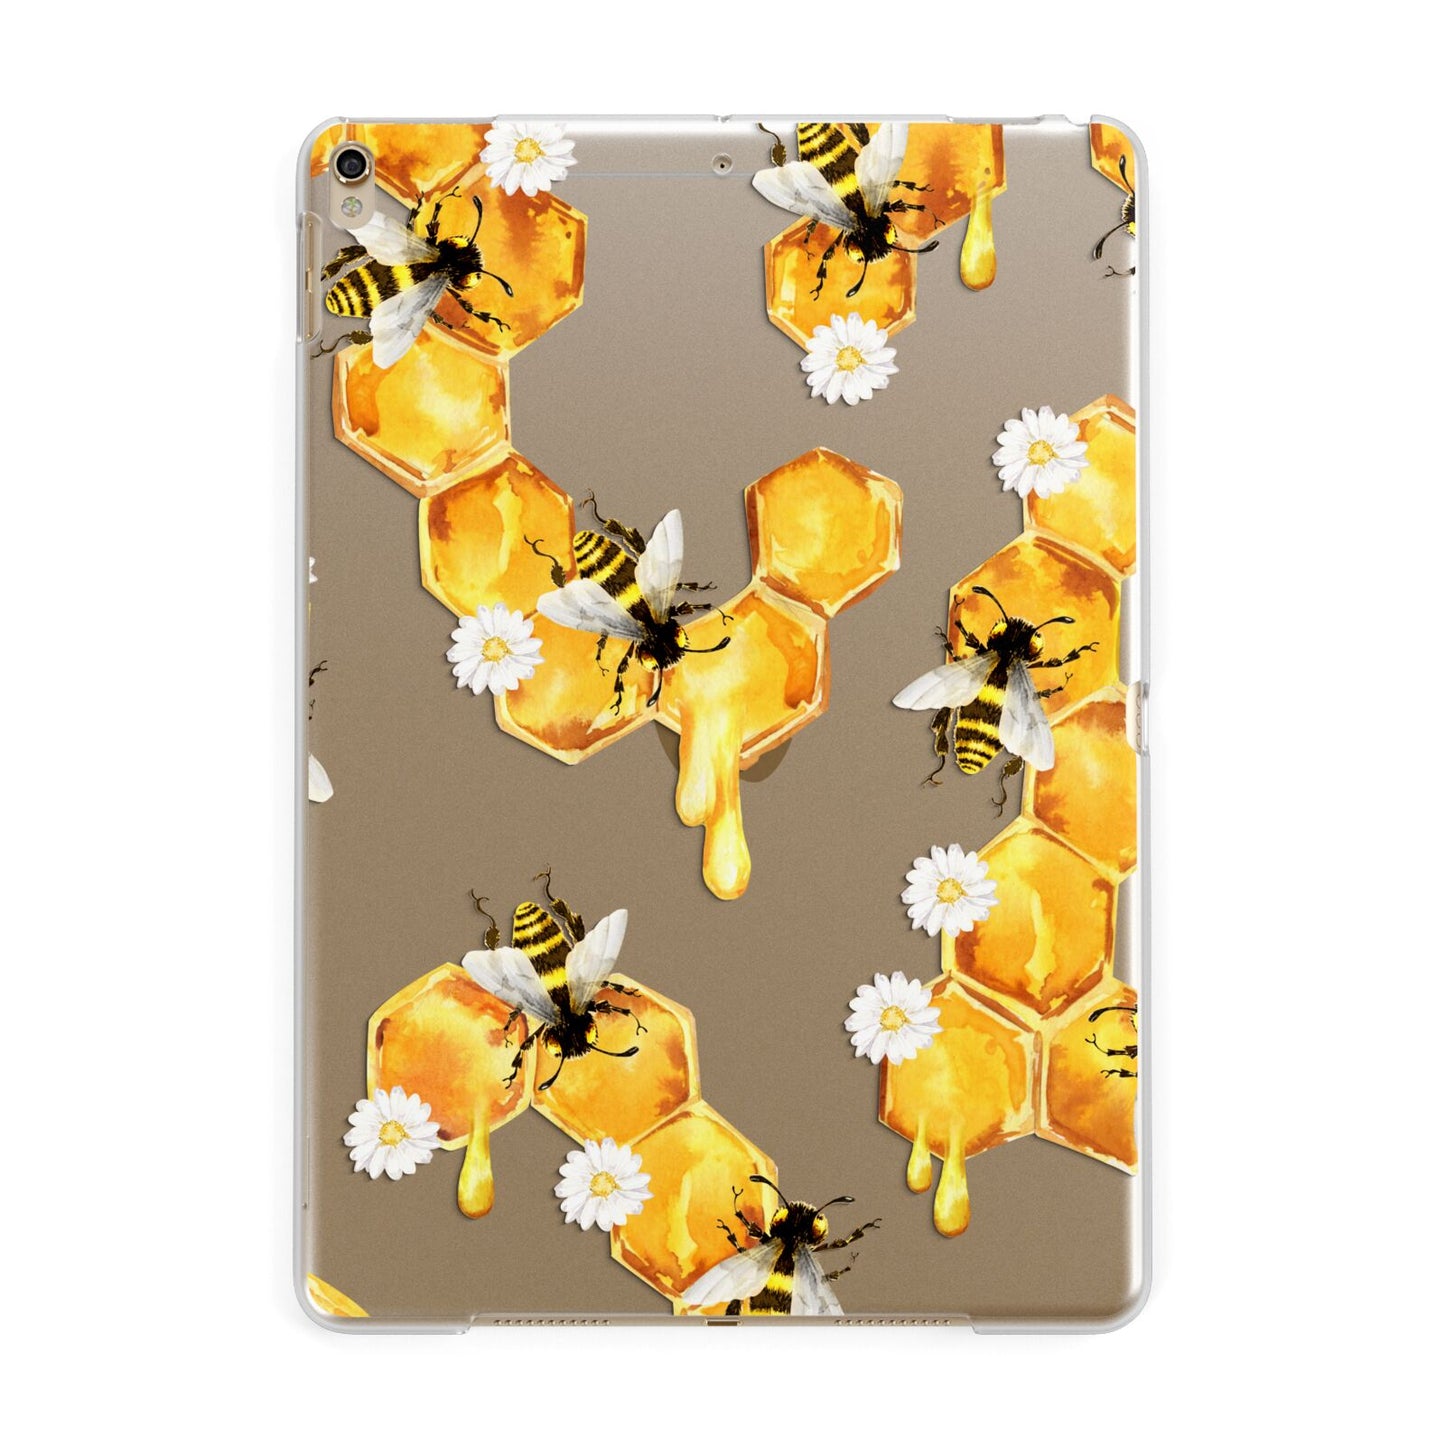 Honeycomb with Bees and Daisies Apple iPad Gold Case